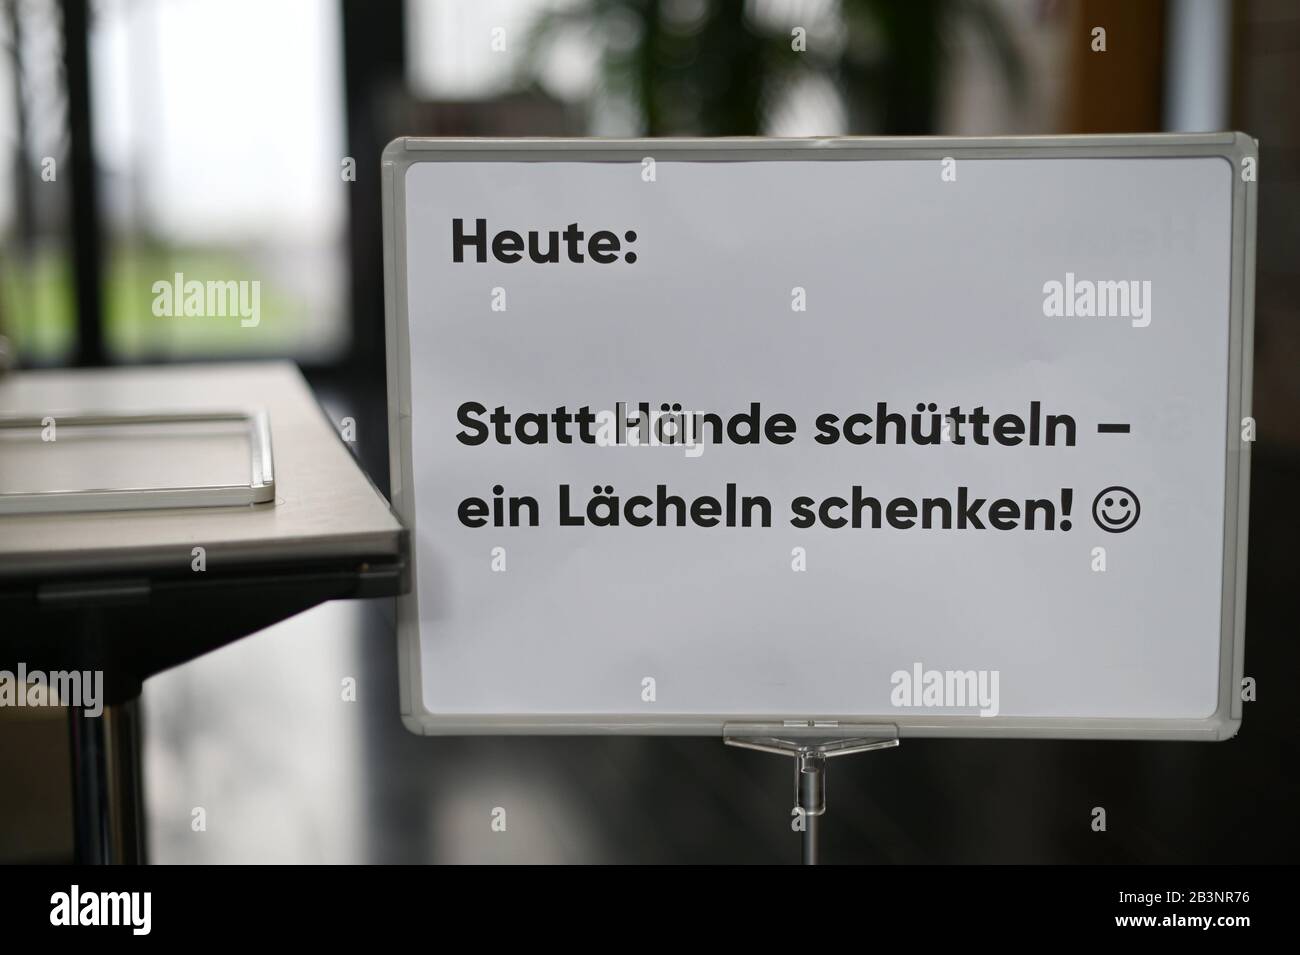 Berlin, Germany. 05th Mar, 2020. A sign with the inscription 'Heute statt Hände schütteln - ein Lächeln schenken' (Today instead of shaking hands - give a smile) is located in the entrance area for the event Medientage Mitteldeutschland. This is intended as a precautionary measure because of the corona virus currently in circulation. The event will precede the main Leipzig congress in May. Credit: Frank May/dpa - Zentralbild/dpa/Alamy Live News Stock Photo